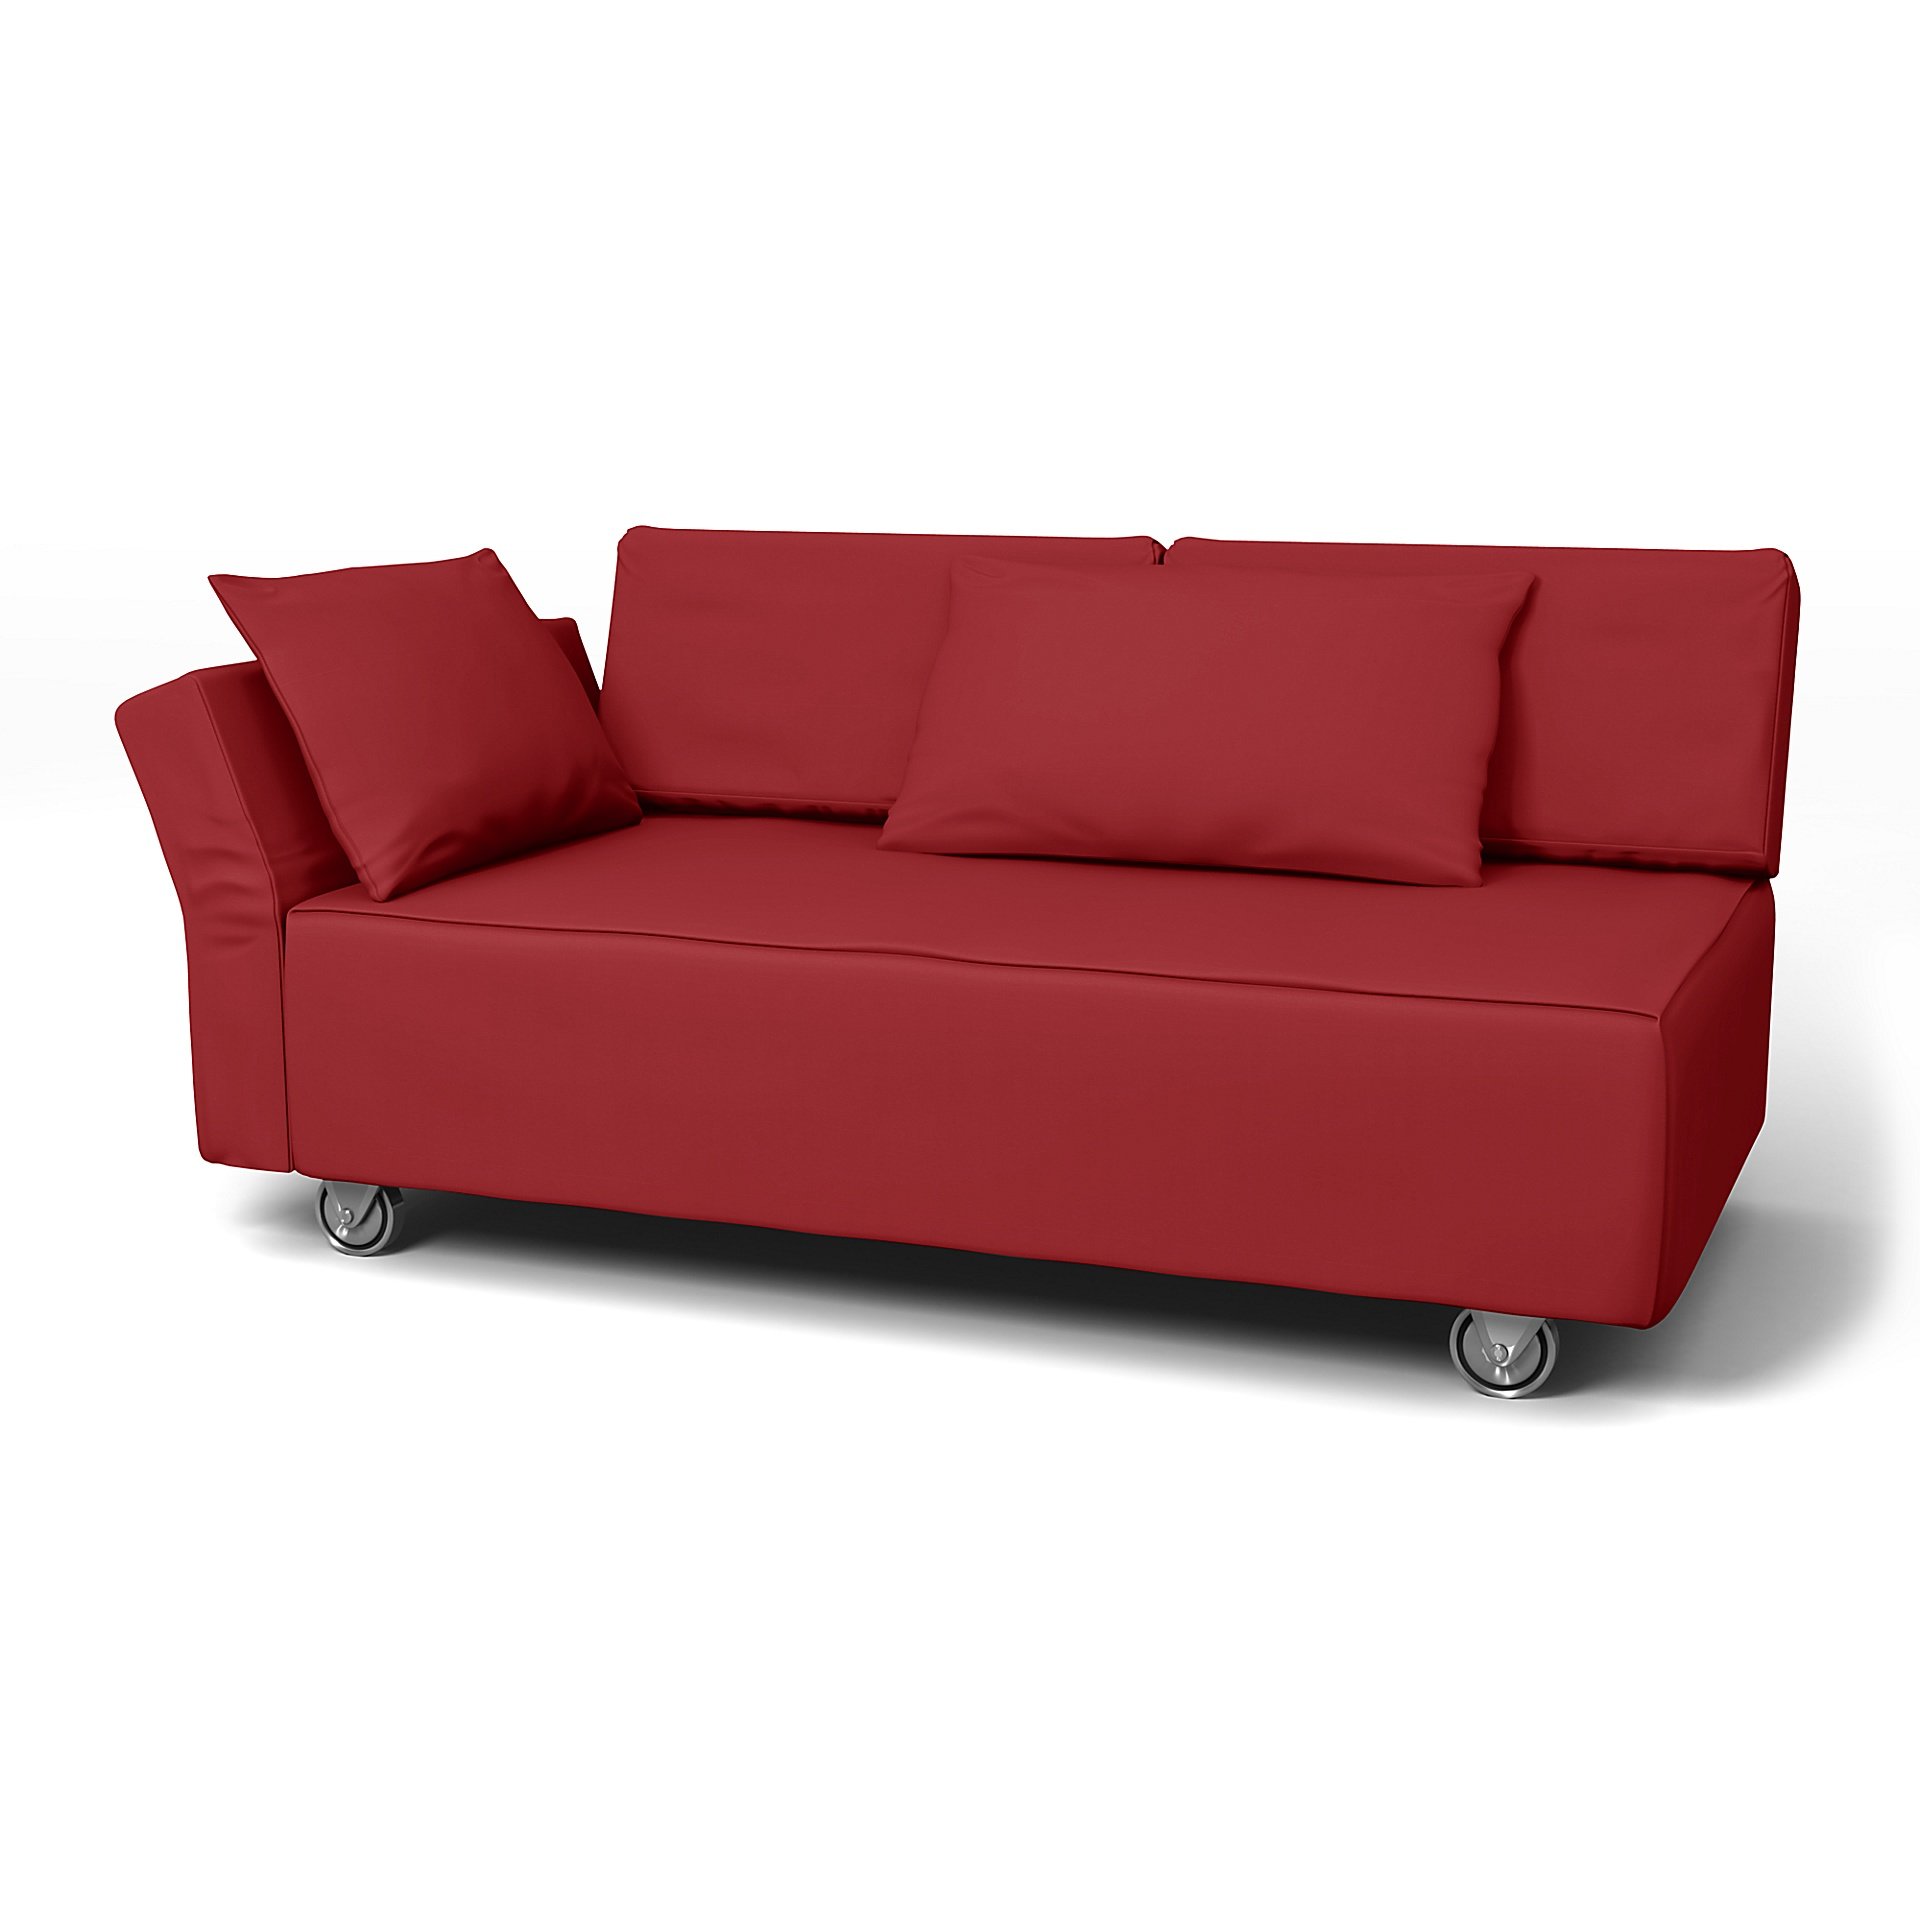 IKEA - Falsterbo 2 Seat Sofa with Left Arm Cover, Scarlet Red, Cotton - Bemz